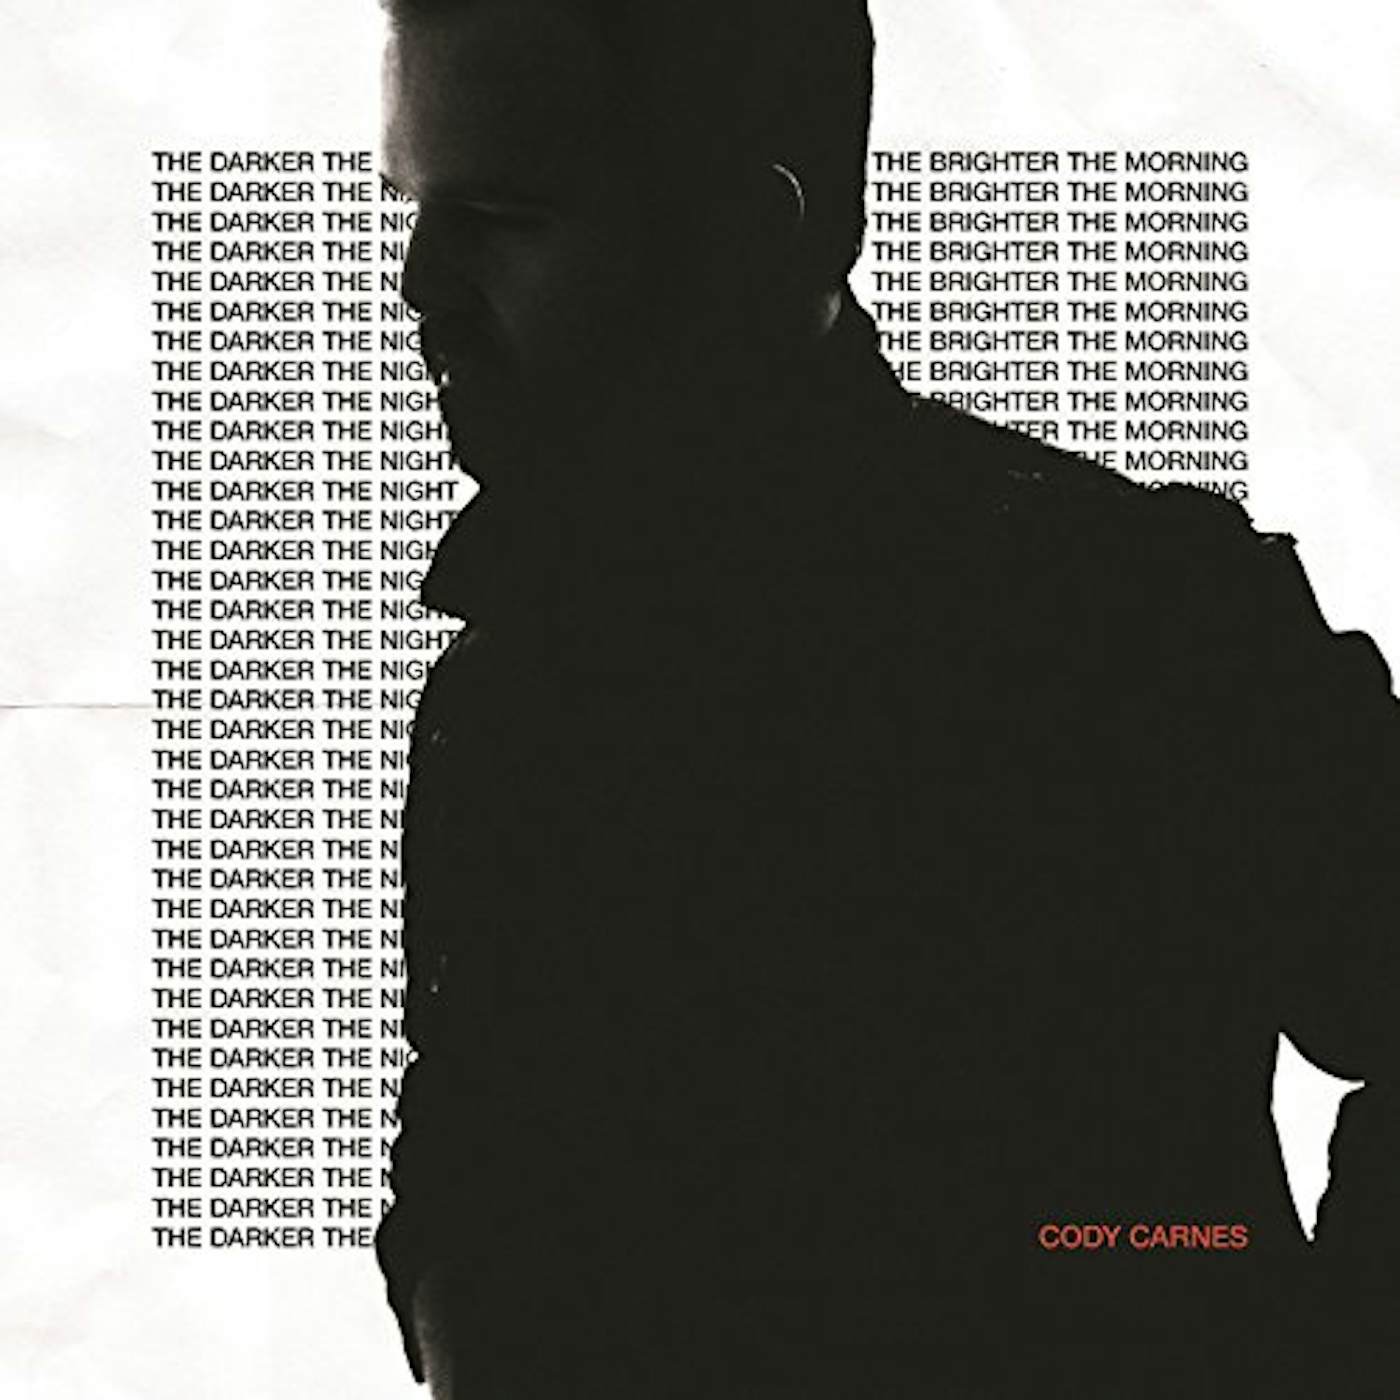 Cody Carnes DARKER THE NIGHT THE BRIGHTER THE MORNING CD